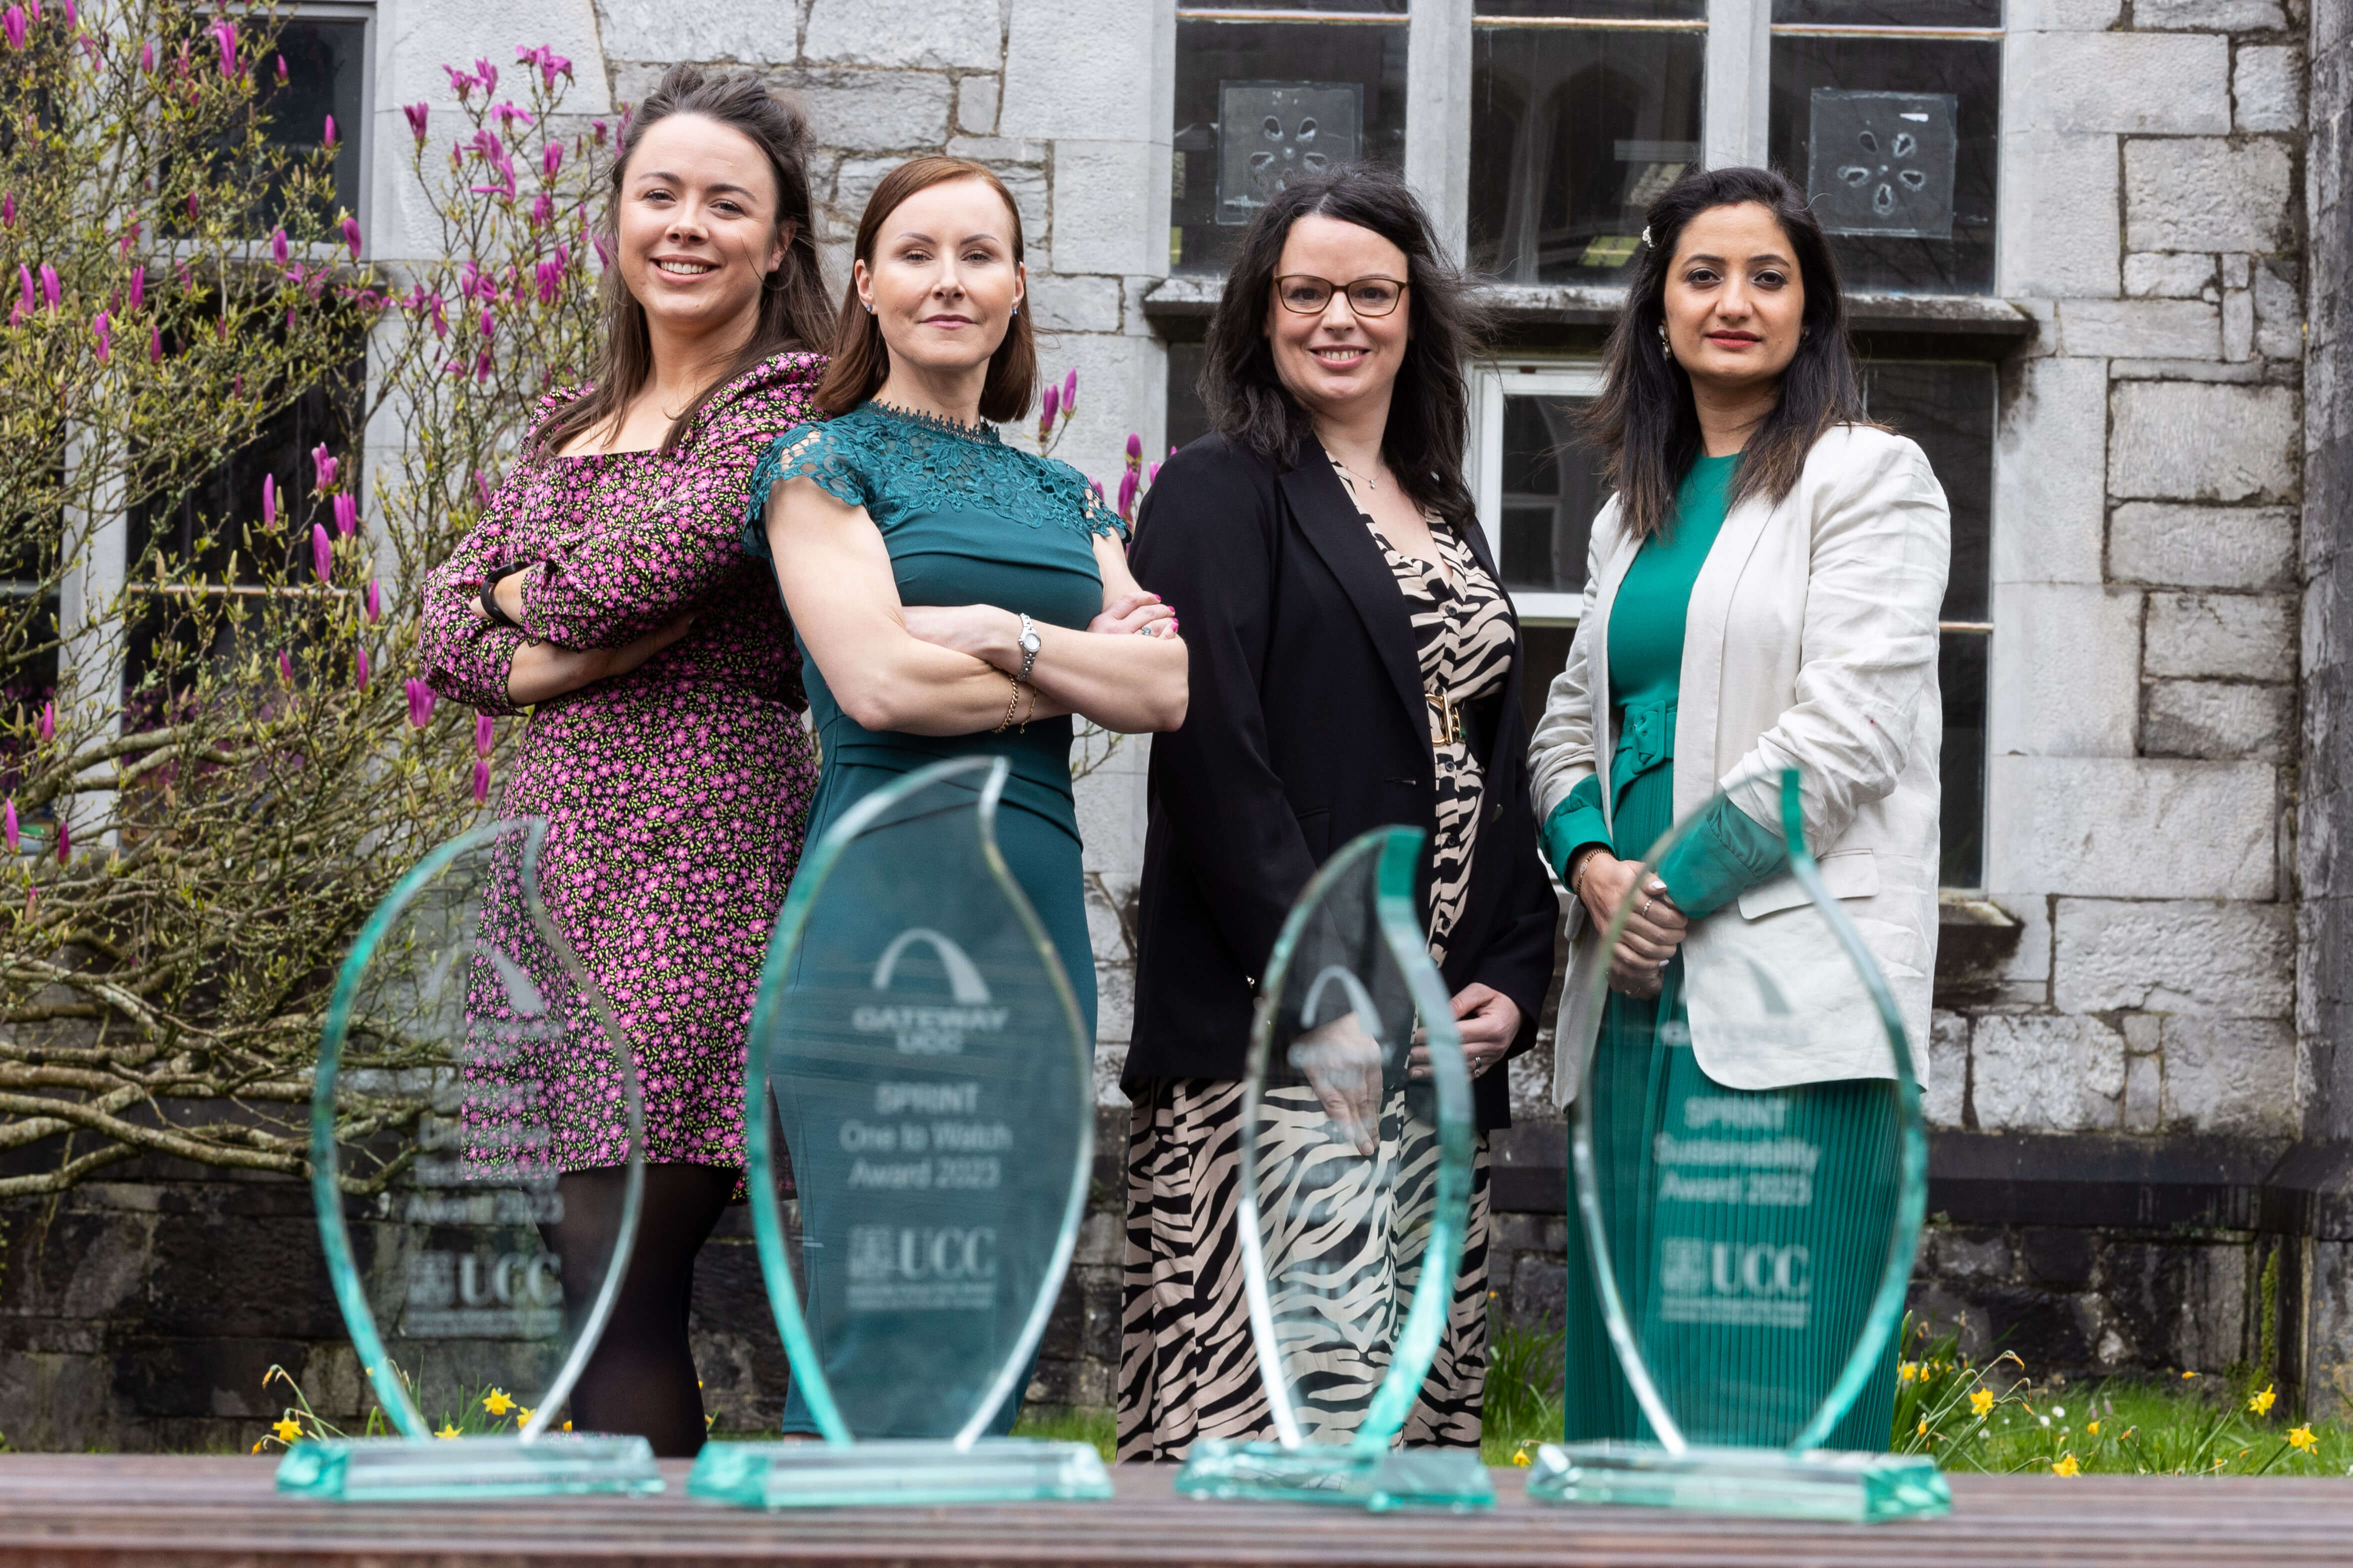 Dr Julie O’ Sullivan, APC Microbiome Ireland, Dr Siobhain O’ Mahony, APC Microbiome Ireland, Dr Brenda Long, UCC School of Chemistry, Environmental Research Institute & Tyndall National Institute and Dr Shivani Pathania, Teagasc are recipients of the SPRINT Accelerator Programme Awards 2023.